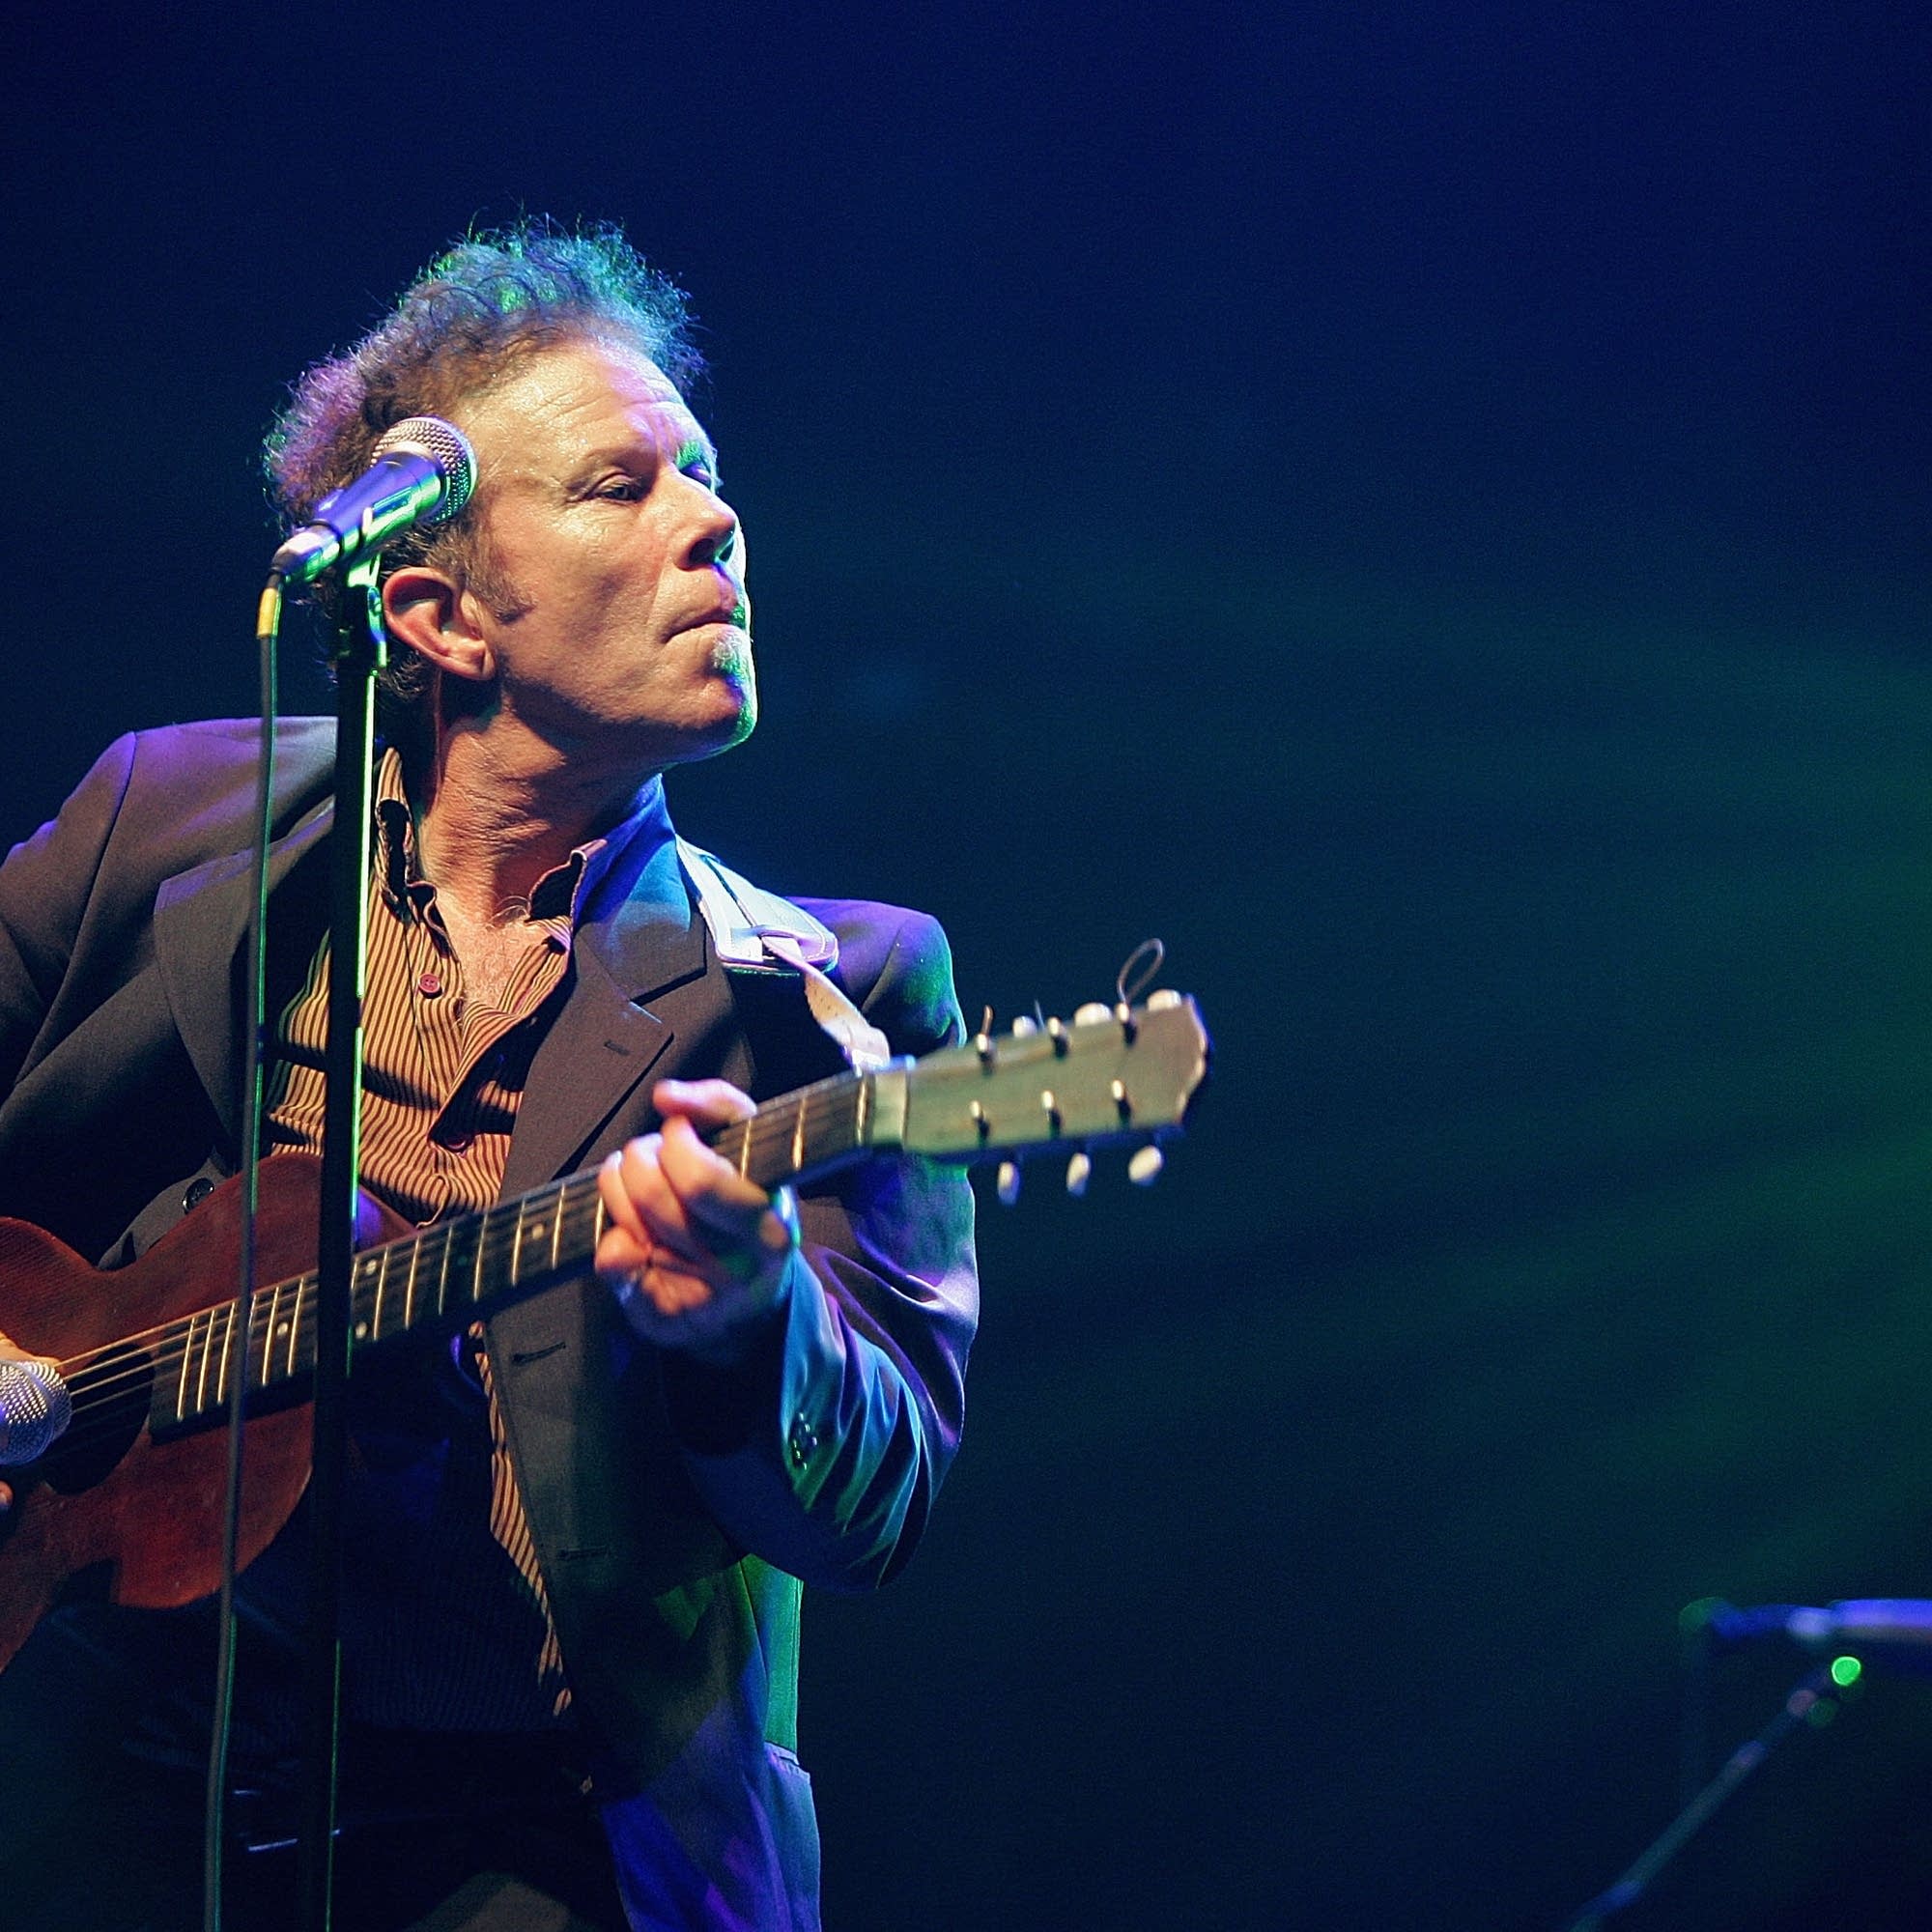 Please join us here at in wishing the one and only Tom Waits a very Happy 71st Birthday today  